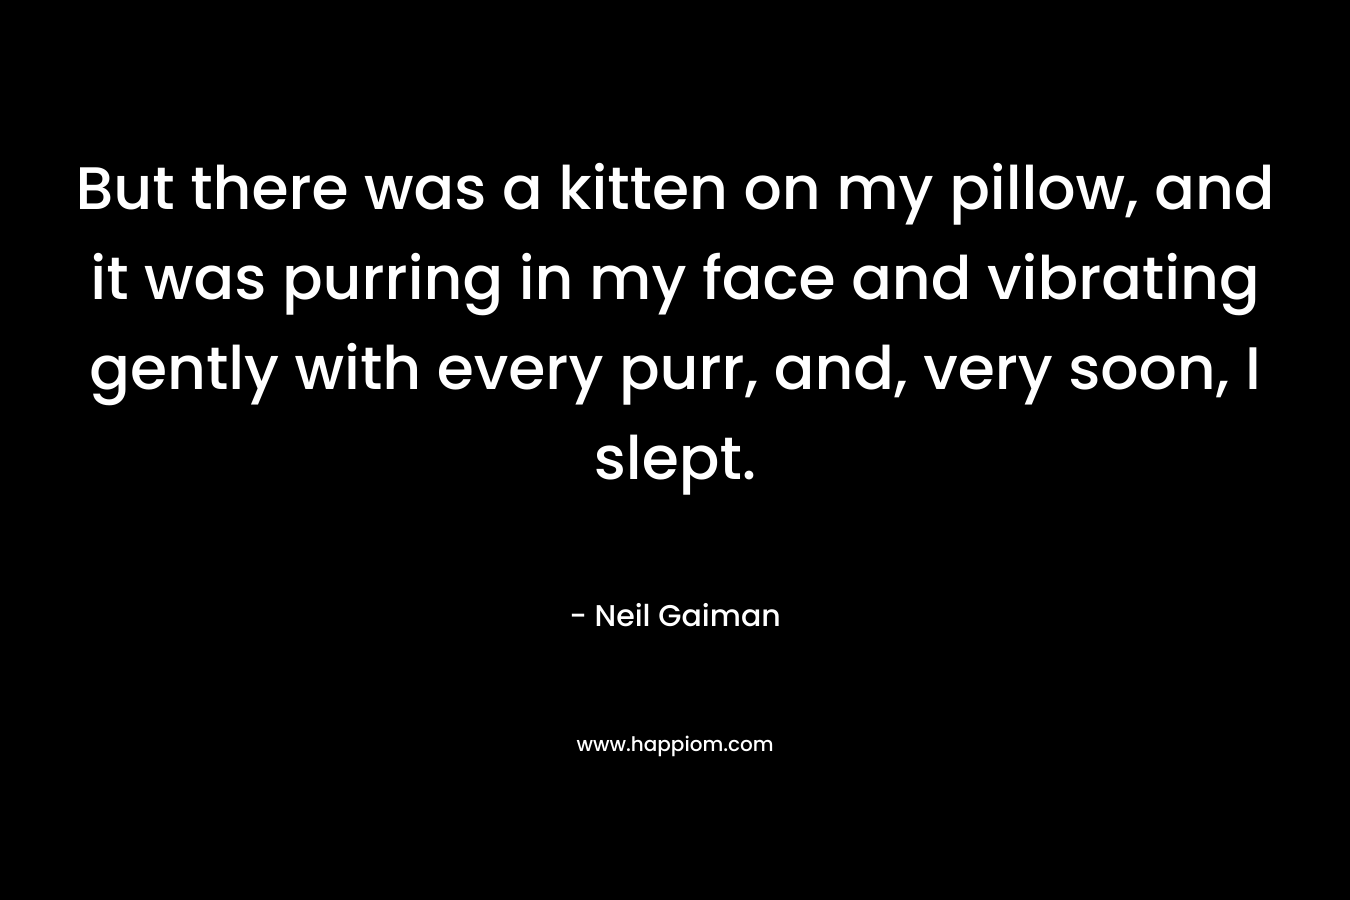 But there was a kitten on my pillow, and it was purring in my face and vibrating gently with every purr, and, very soon, I slept. – Neil Gaiman